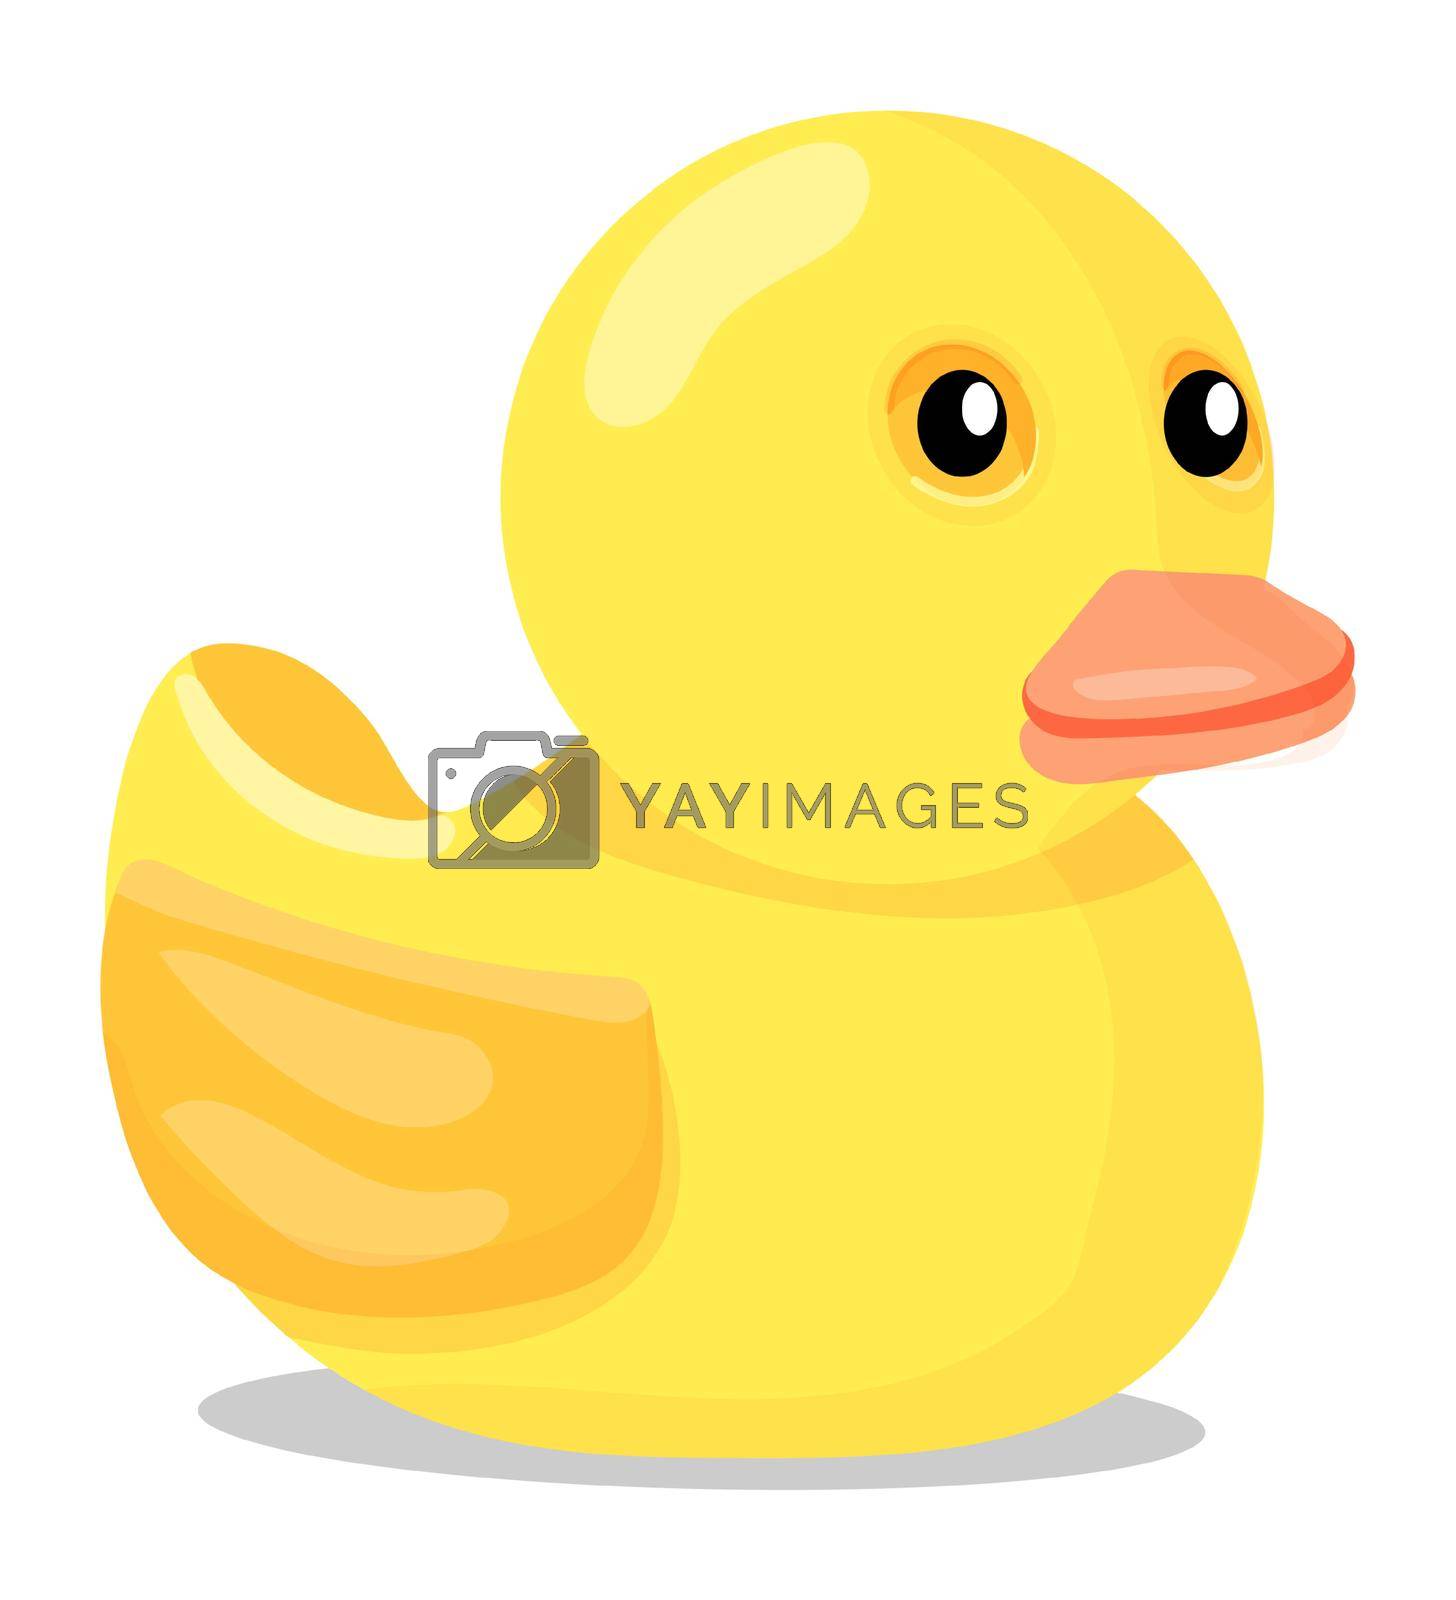 Royalty free image of Rubber duck icon. Yellow bath toy in cartoon style by LadadikArt